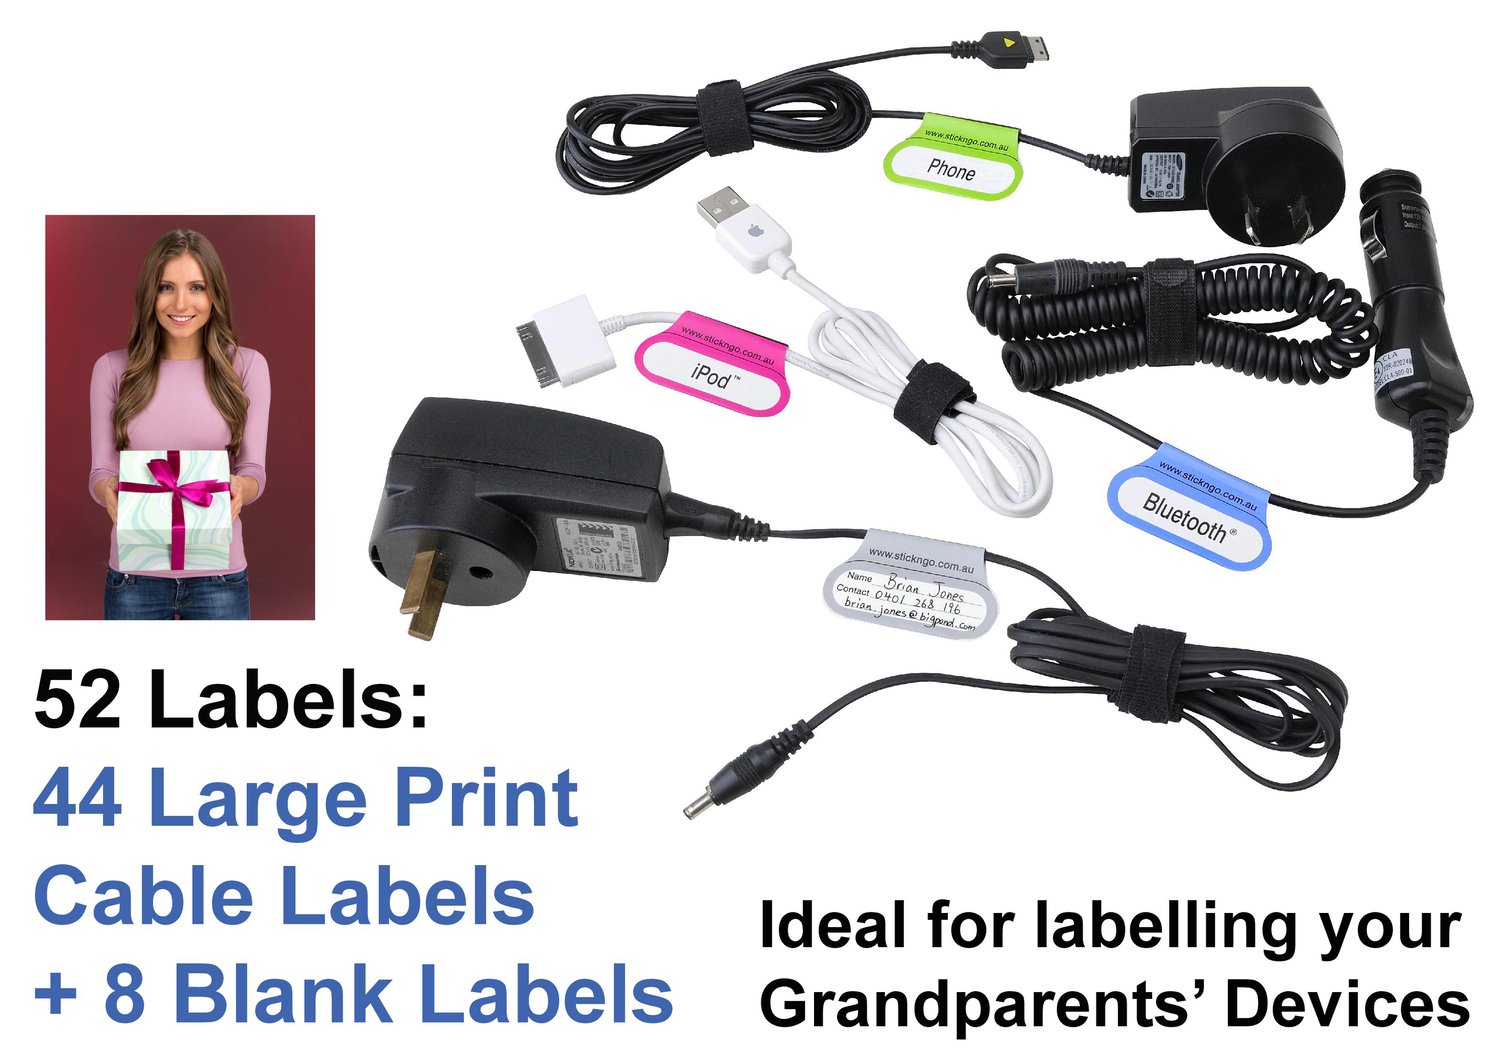 Image of 52 Printed + Blank Adhesive Large Print CABLE LABELS. SPECIAL - only $12.95 per Pack